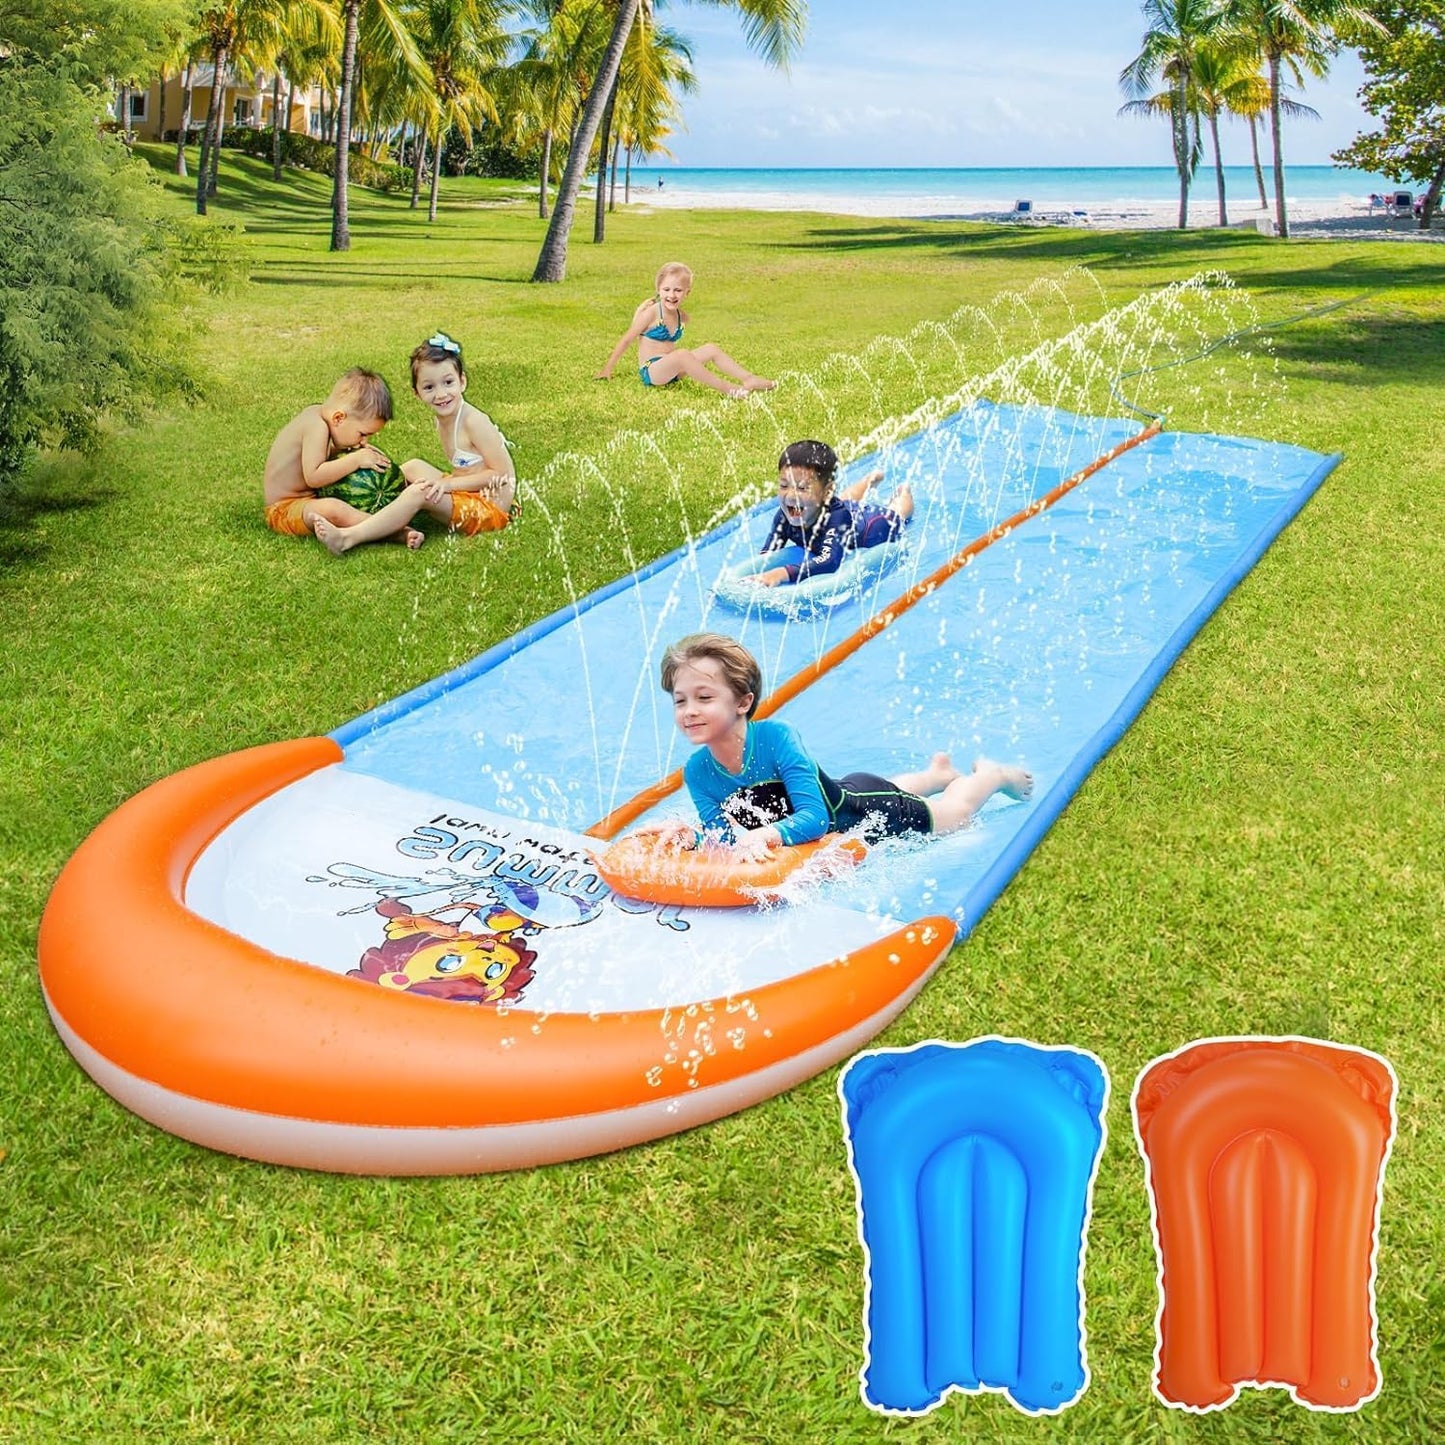 Slip Water and Slide, 15Ft Extra Long Lawn Water Slides for Kids Adults, Double Lanes Racing Backyard Summer Sprinkler and Splash Water Toy, XL Slip Waterslide with 2 Inflatable